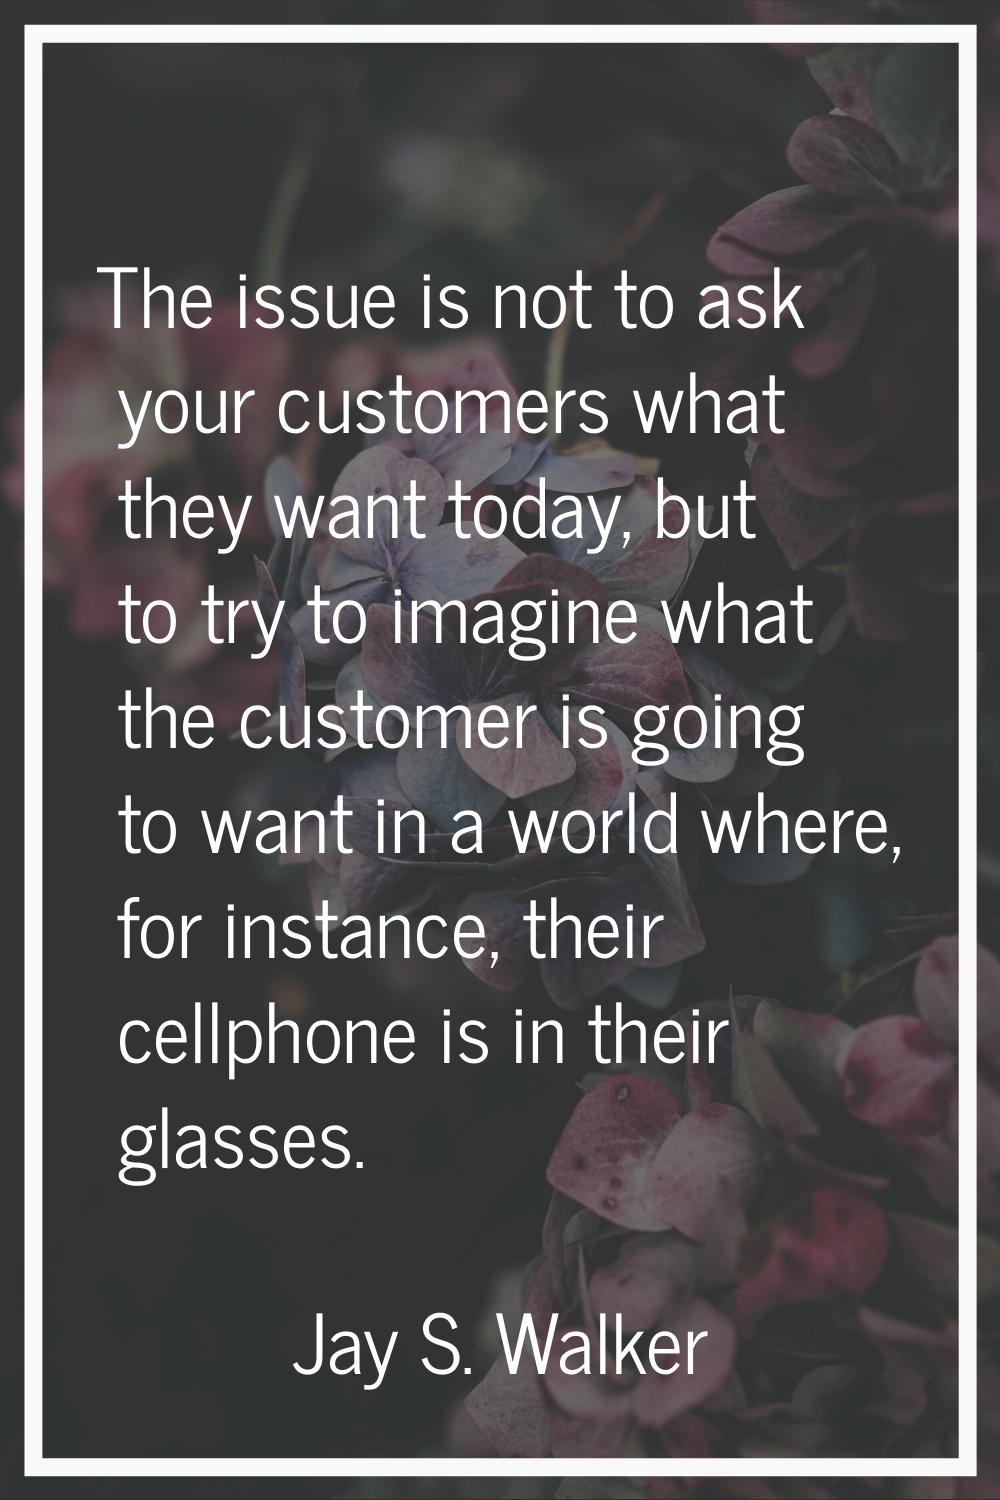 The issue is not to ask your customers what they want today, but to try to imagine what the custome